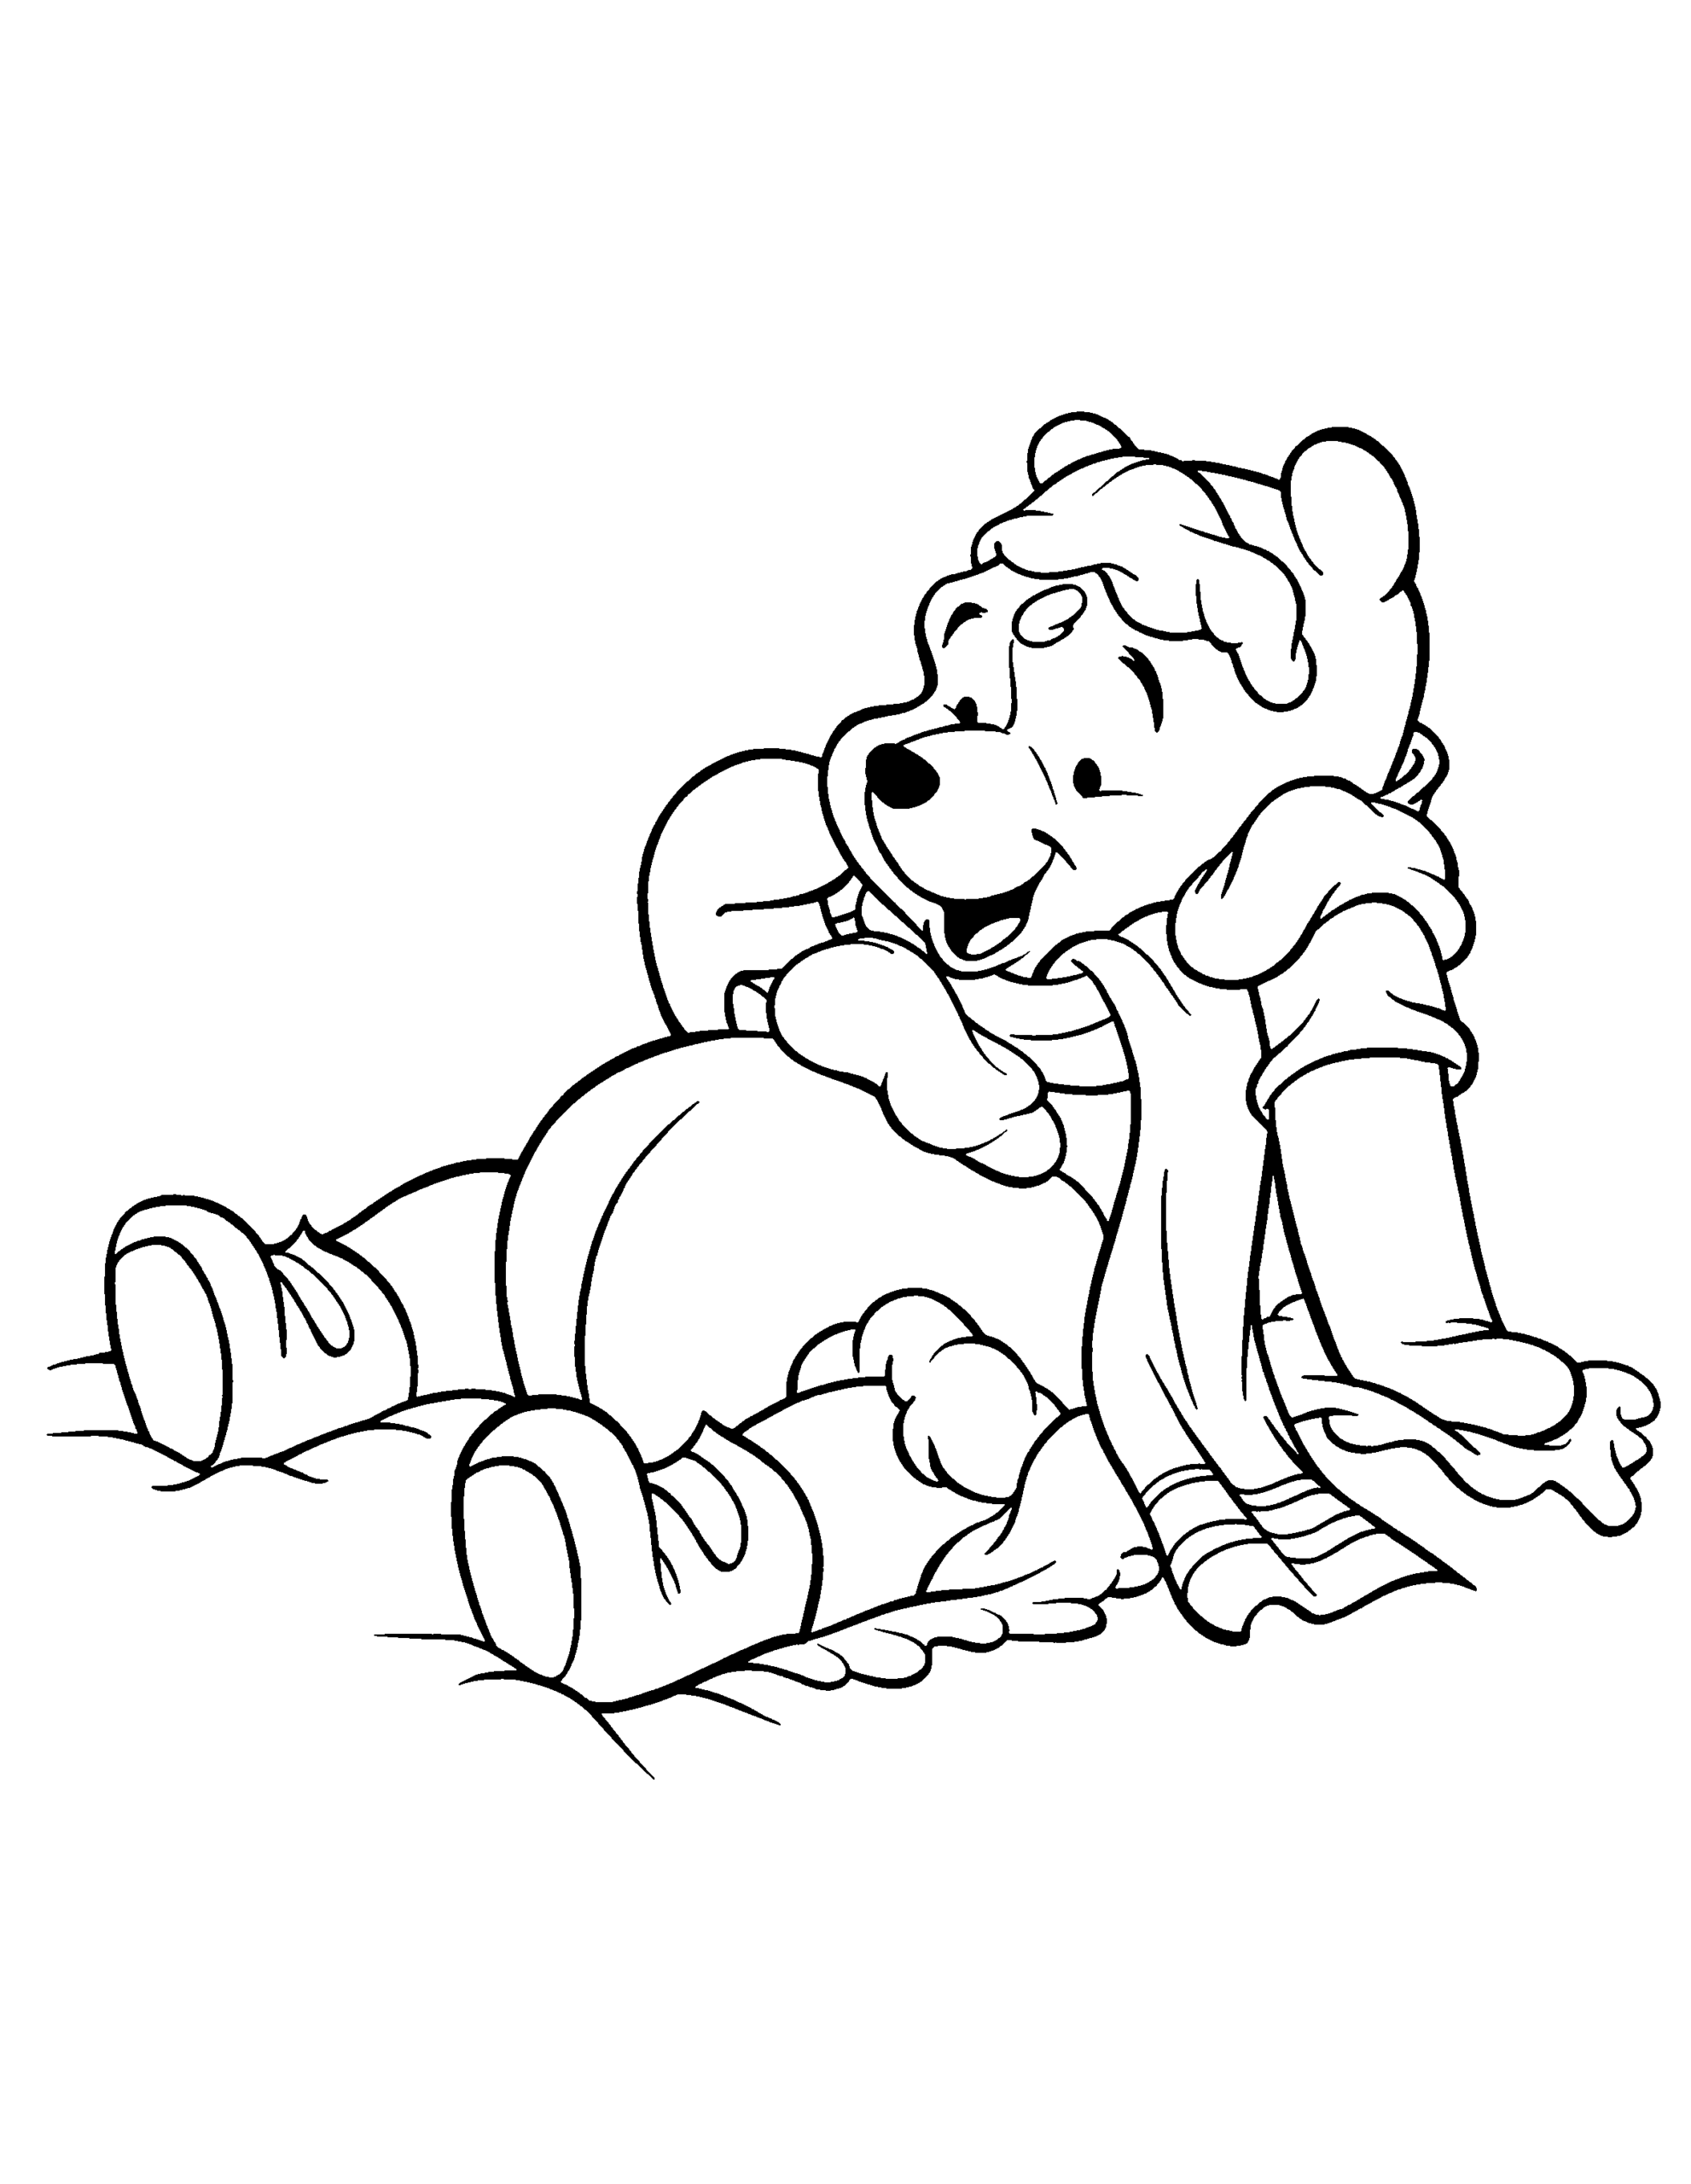 Winnie the Pooh Coloring Pages Cartoons winnie the pooh 90 Printable 2020 7213 Coloring4free